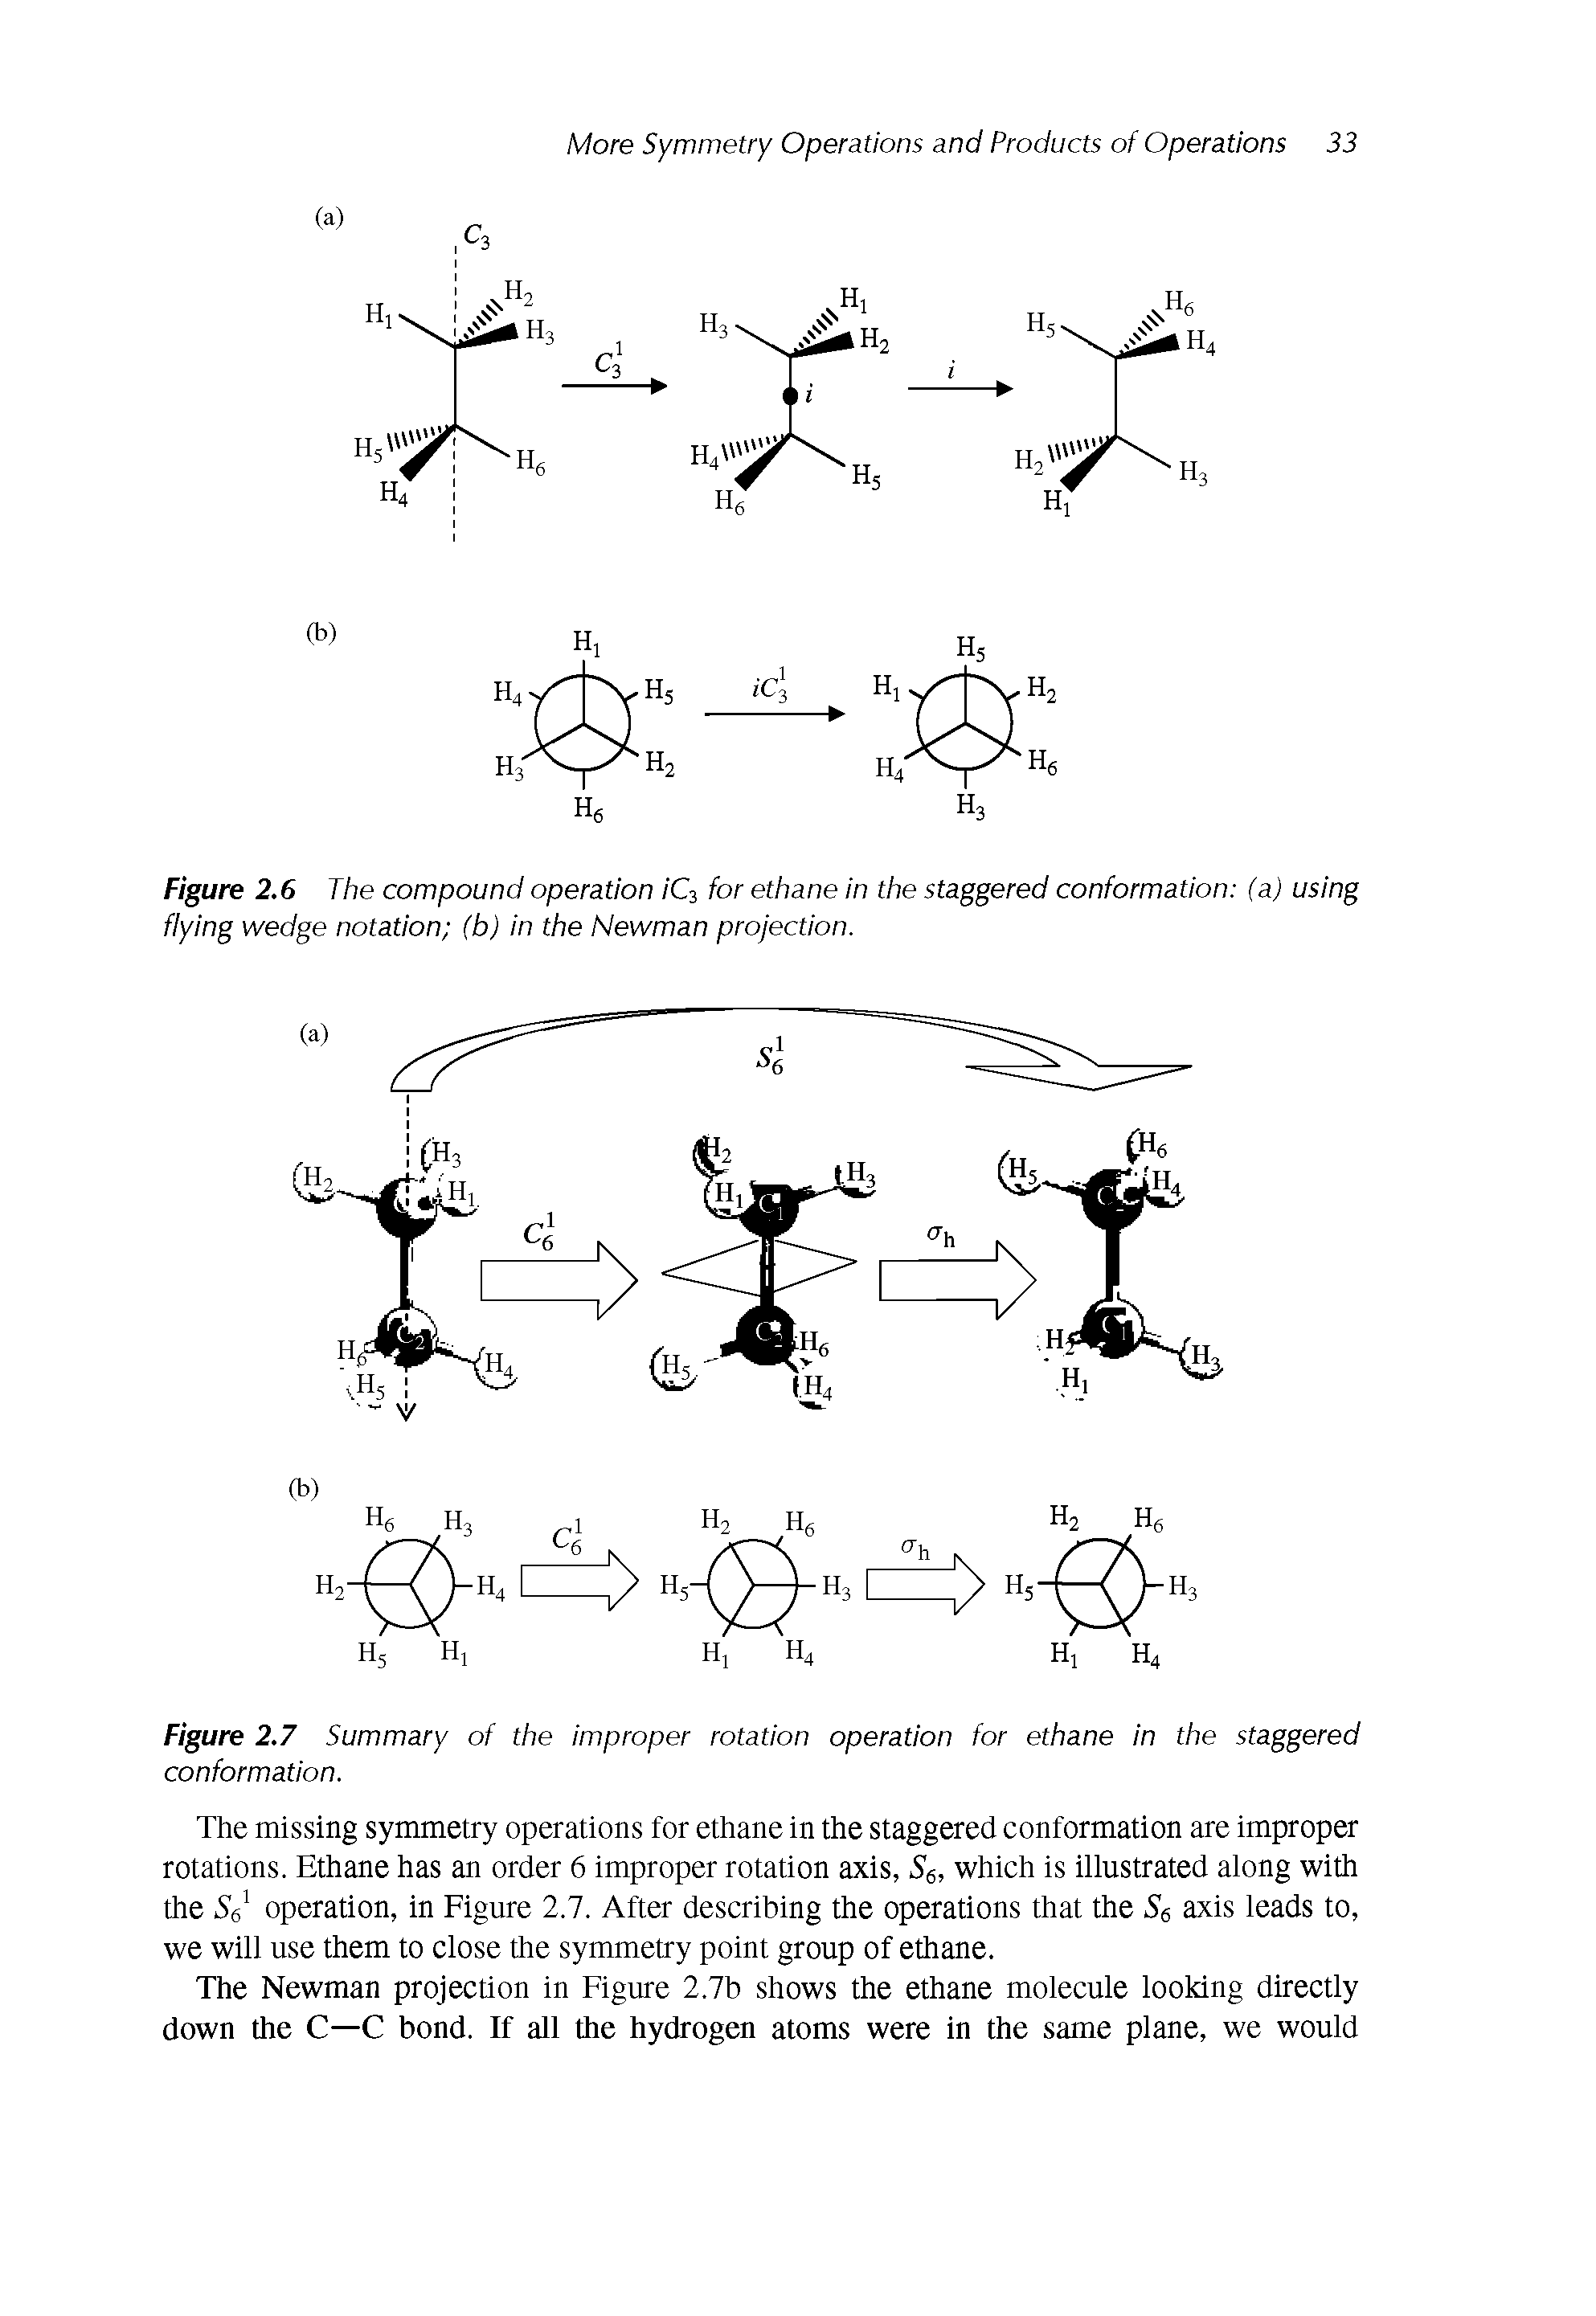 Figure 2.6 The compound operation /C3 for ethane in the staggered conformation (a) using flying wedge notation (b) in the Newman projection.